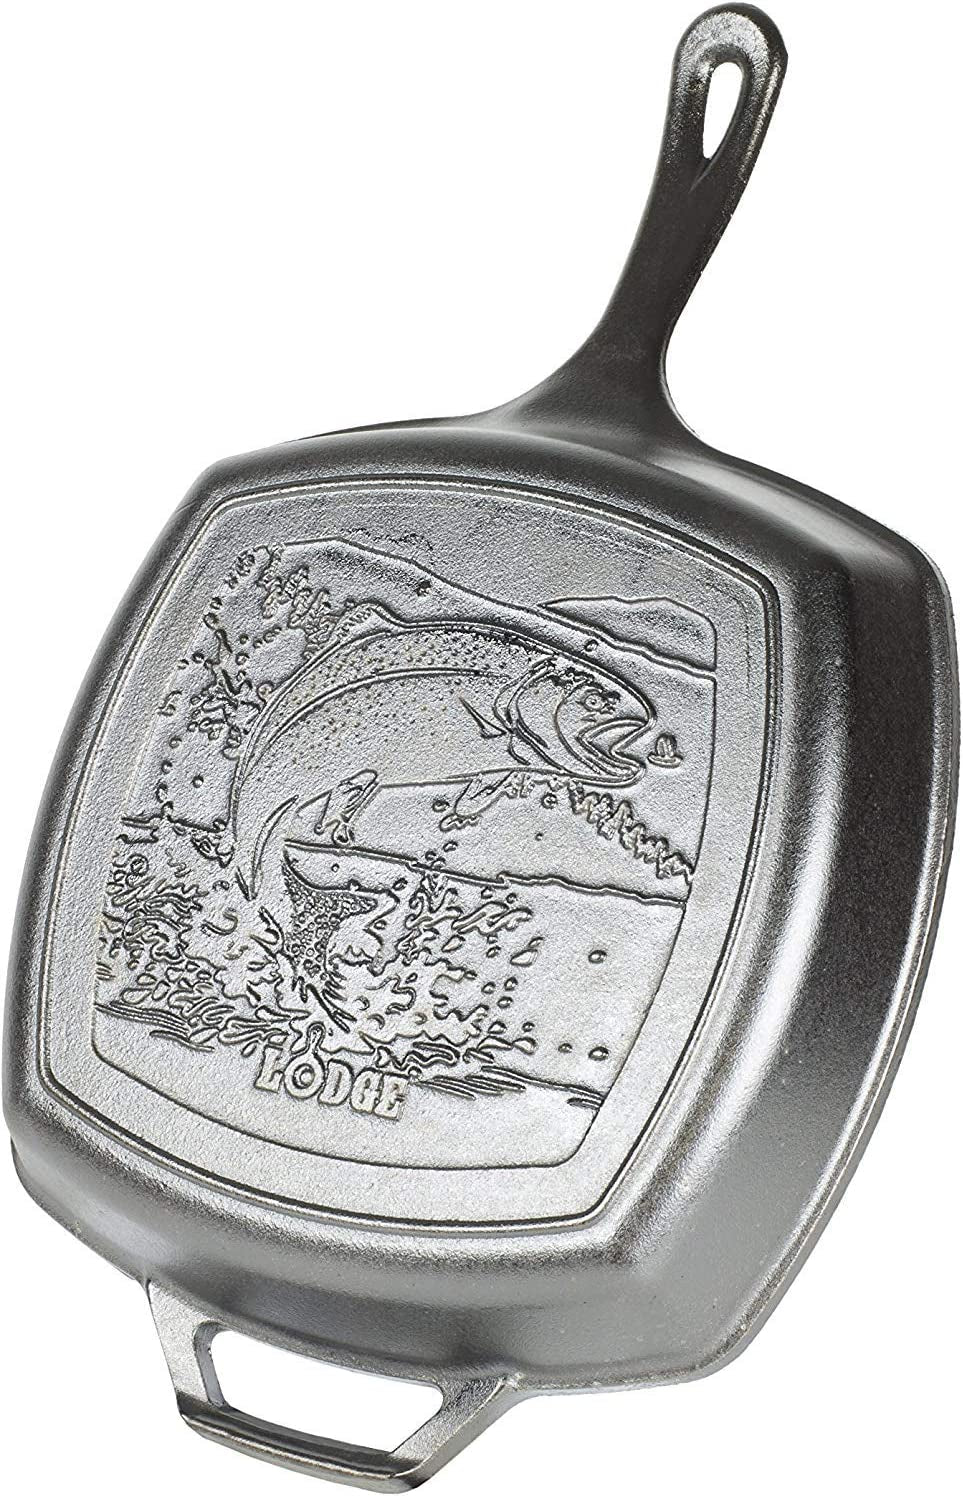 Lodge, Lodge L9OGWLMO 10.5 Inch Cast Iron Griddle with Moose Scene, Black